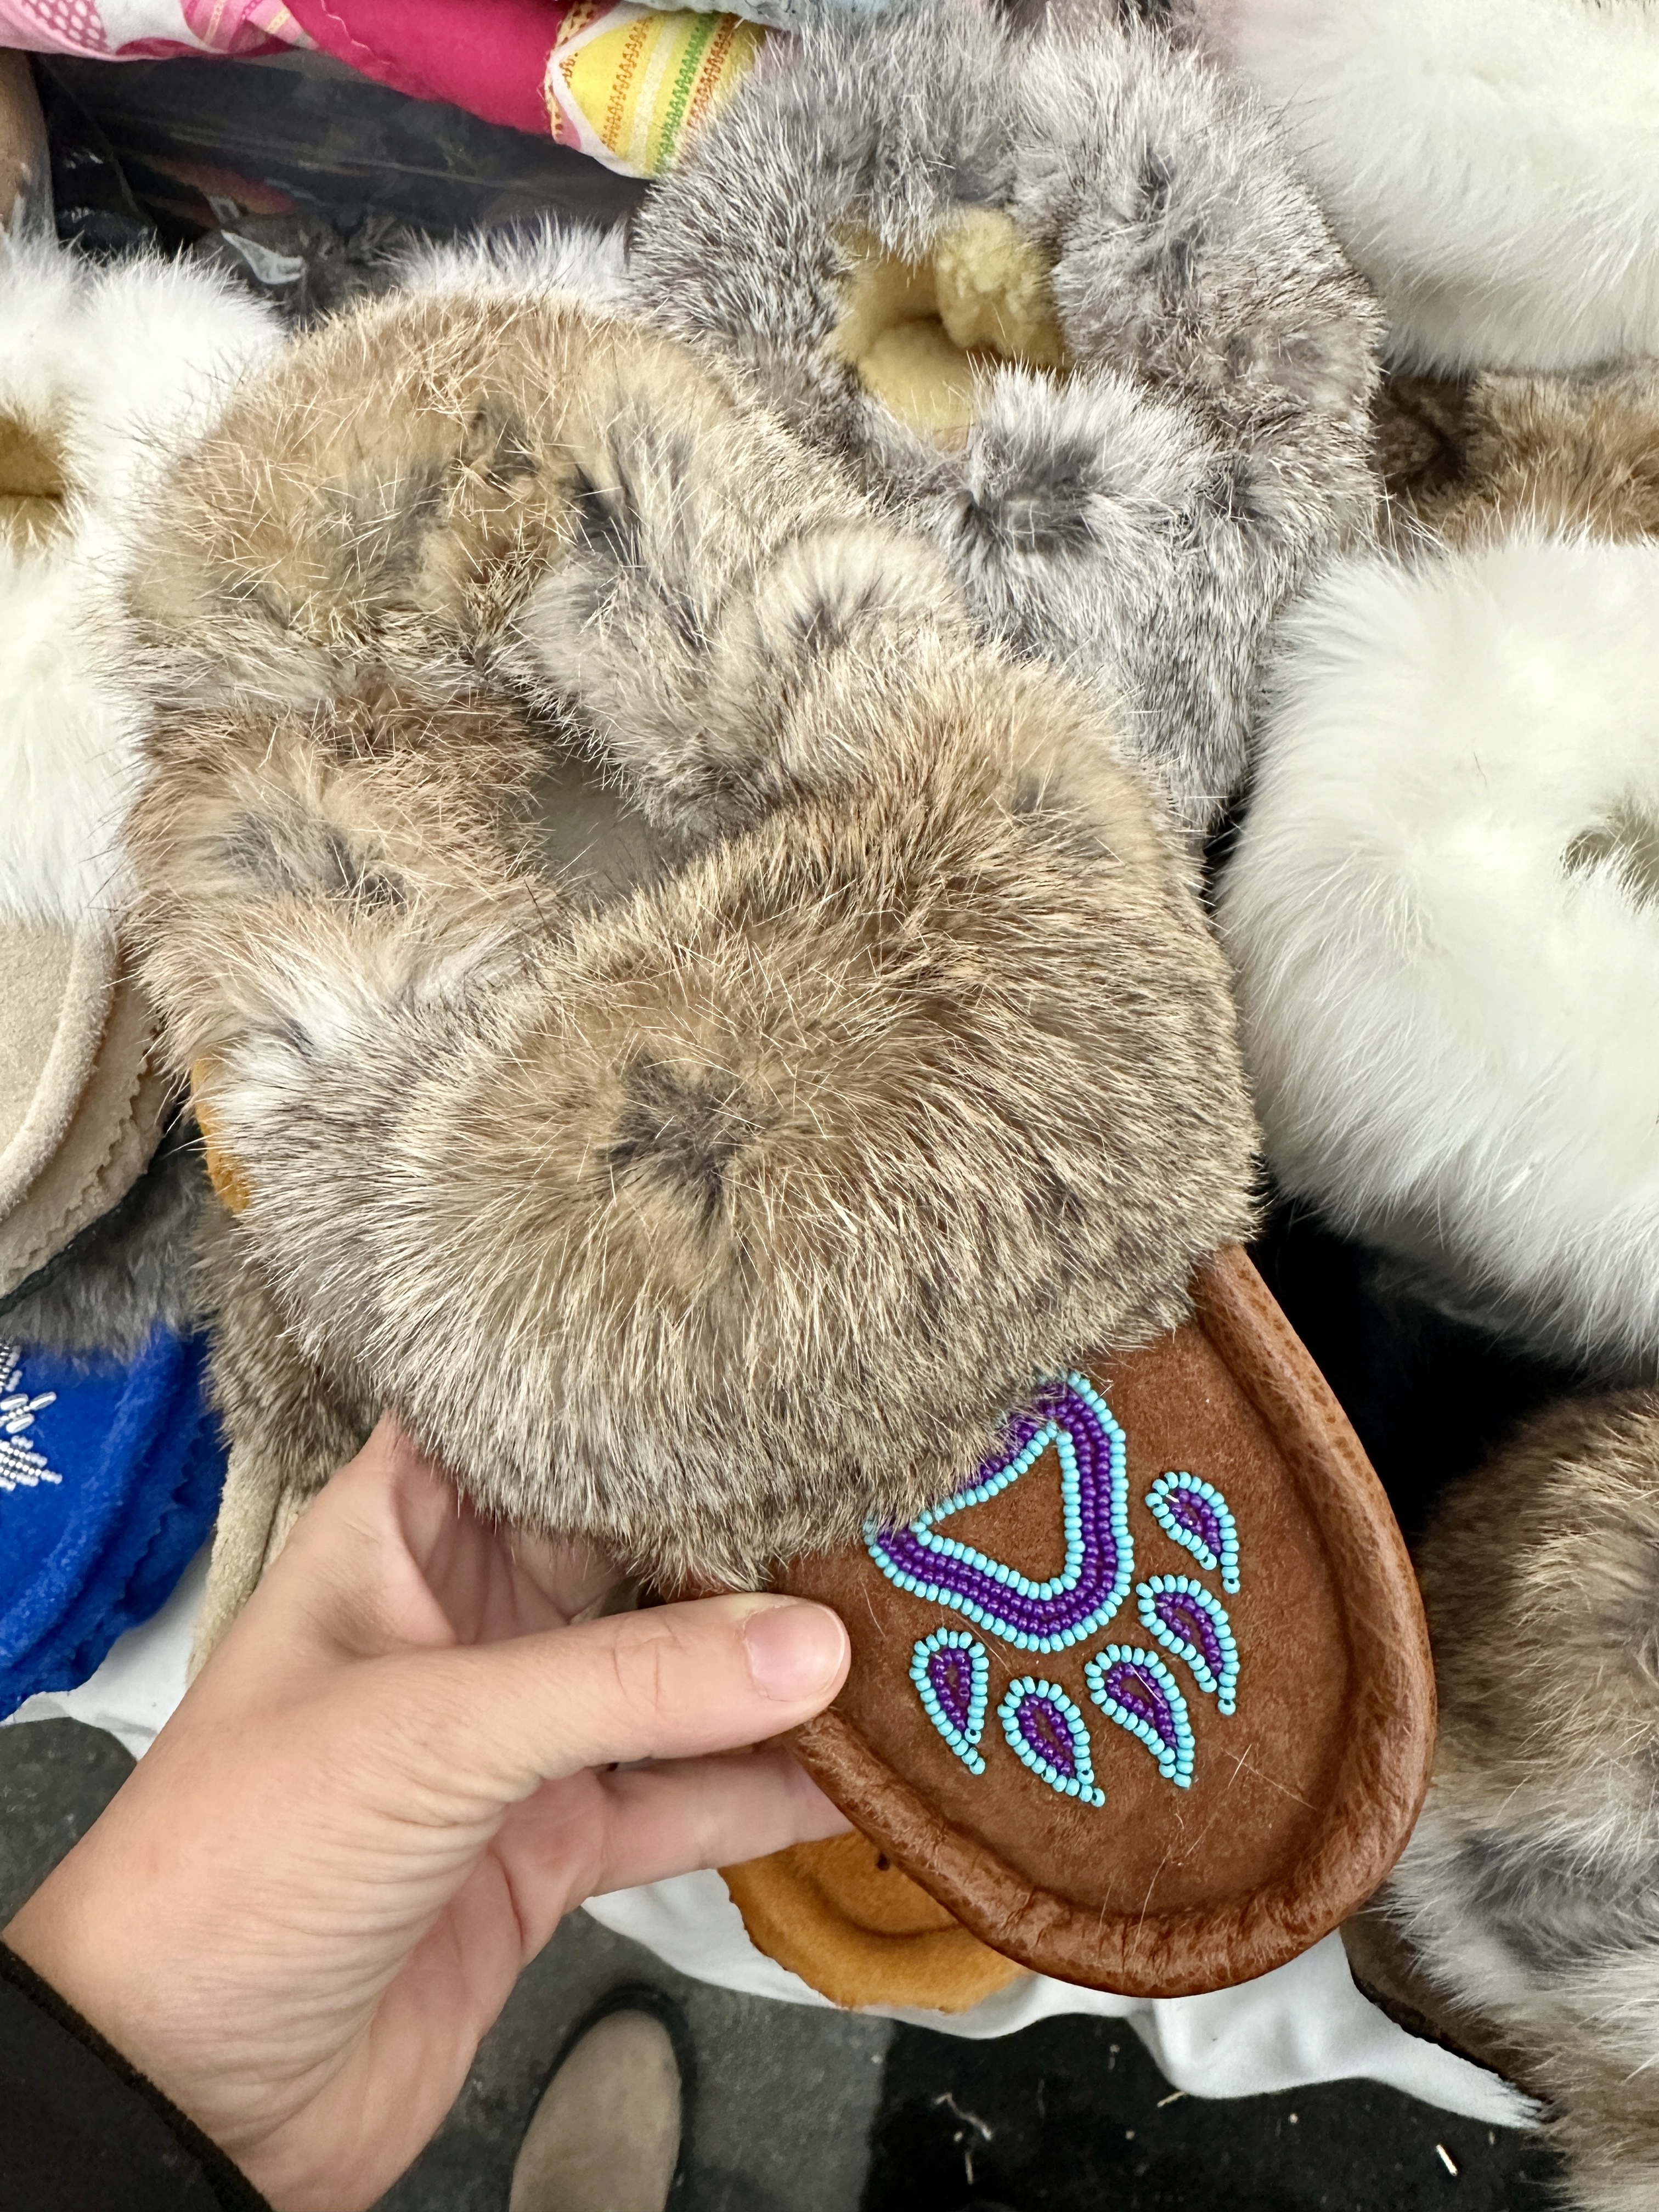 A pair of handmade moccasins with a bear paw design on them